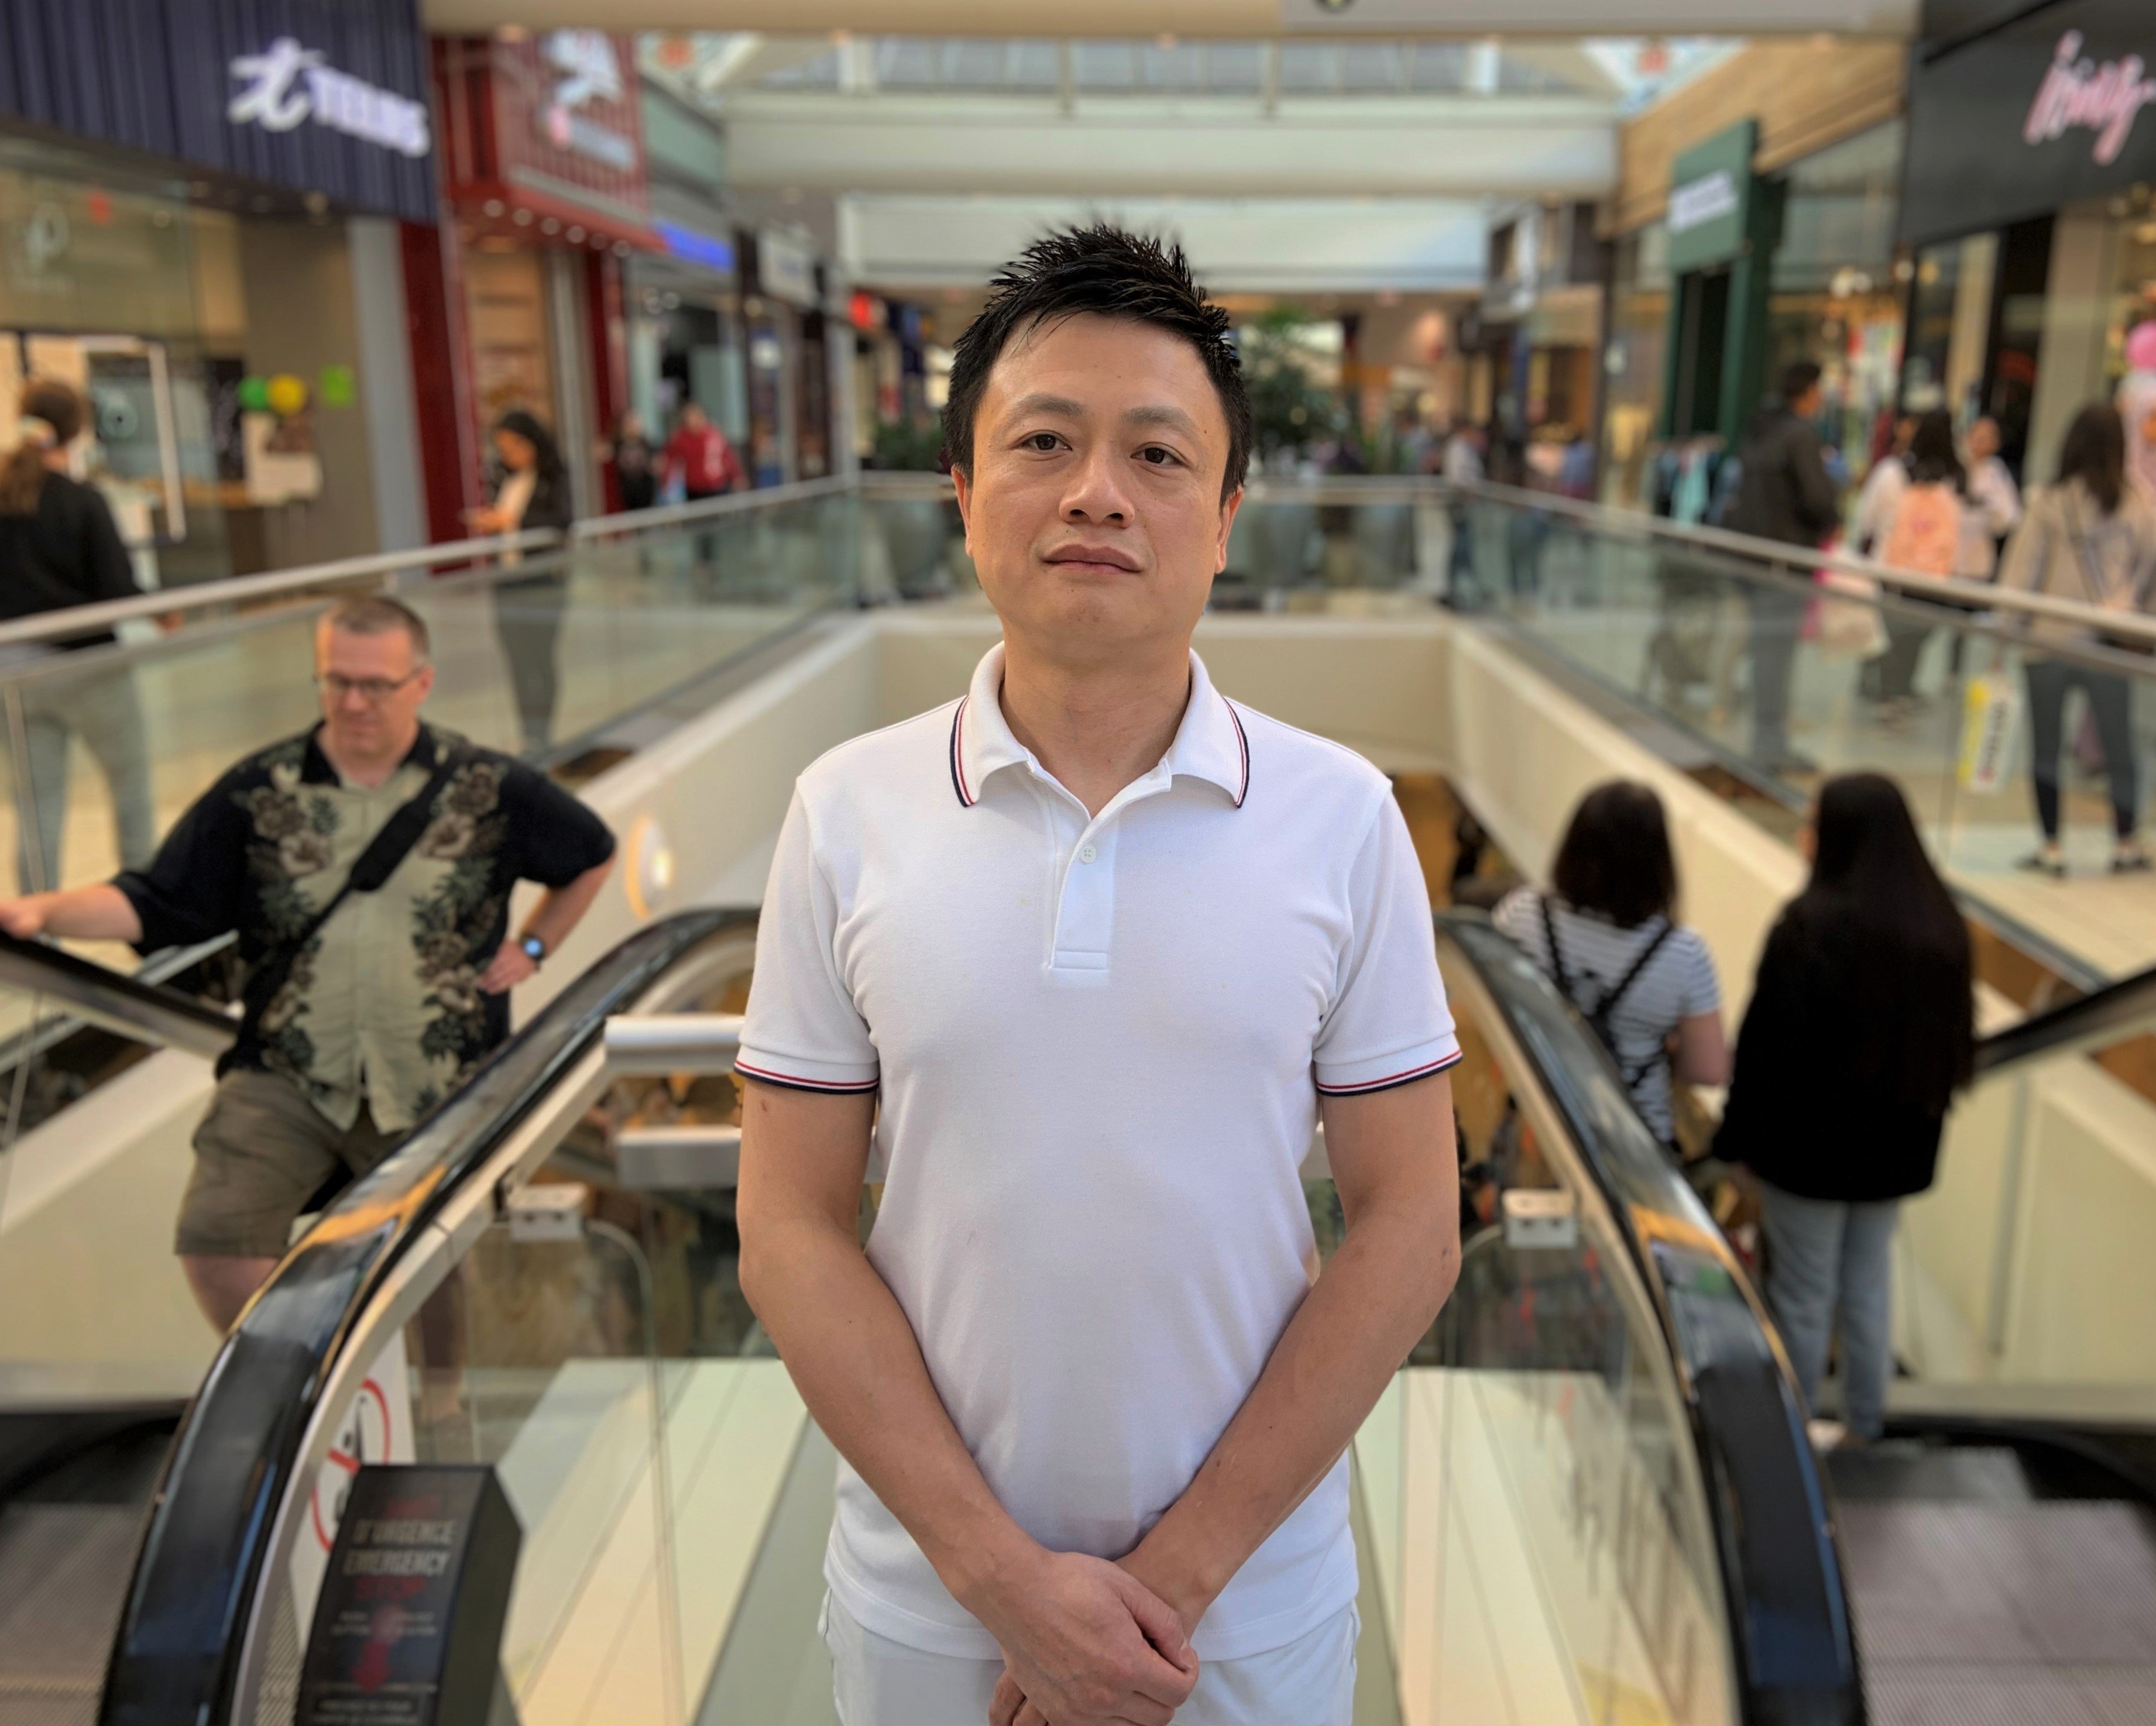 Vancent Zhu, pictured in the Metrotown shoppingmall near his home in Burnaby, British Columbia, says the Hong Kong protest anthem Glory To Hong Kong is "ridiculous". Photo: Ian Young